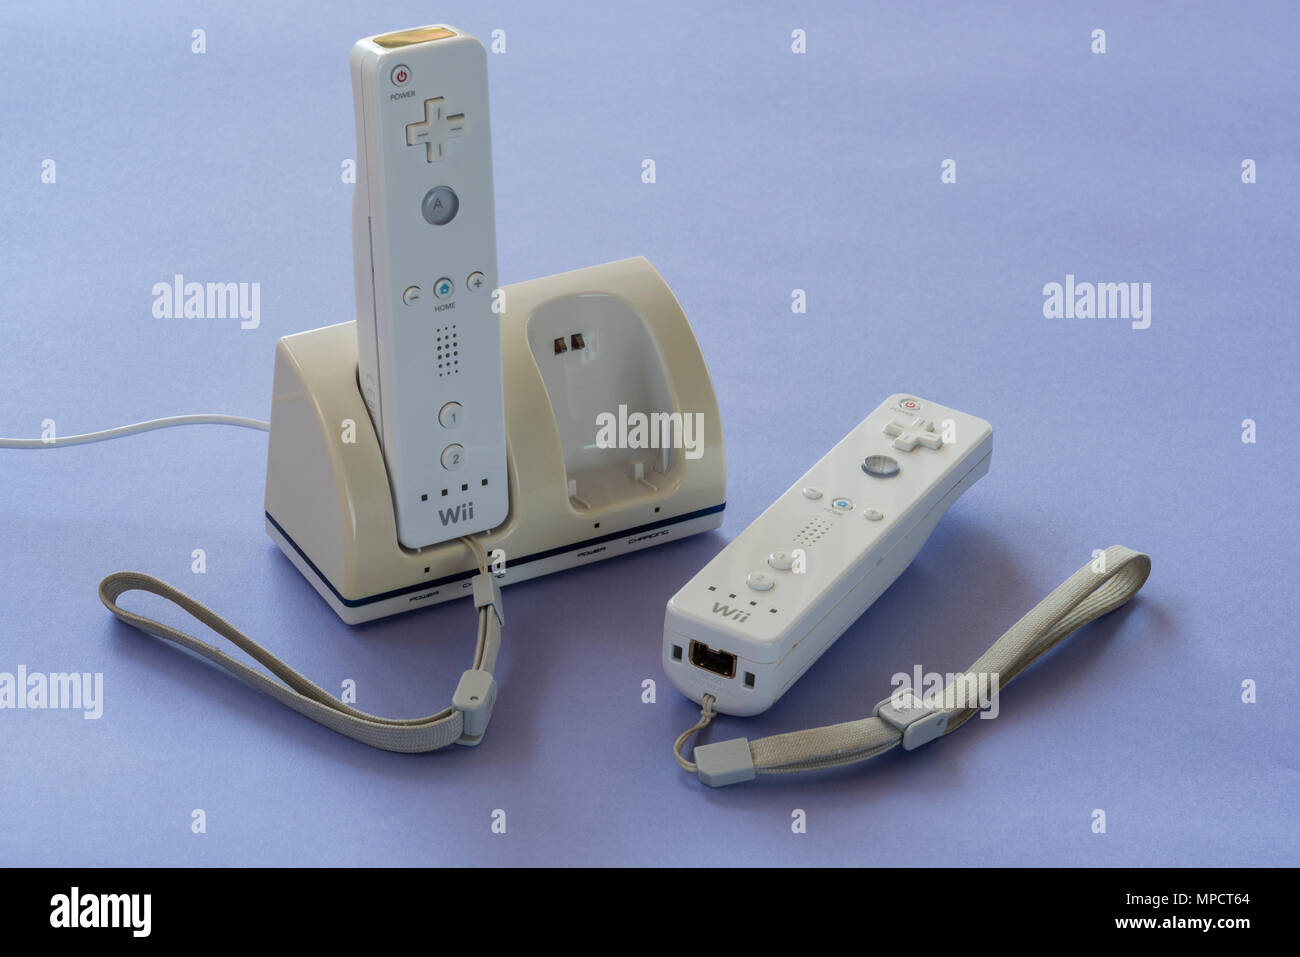 Nintendo Wii base station two hand controllers. Stock Photo